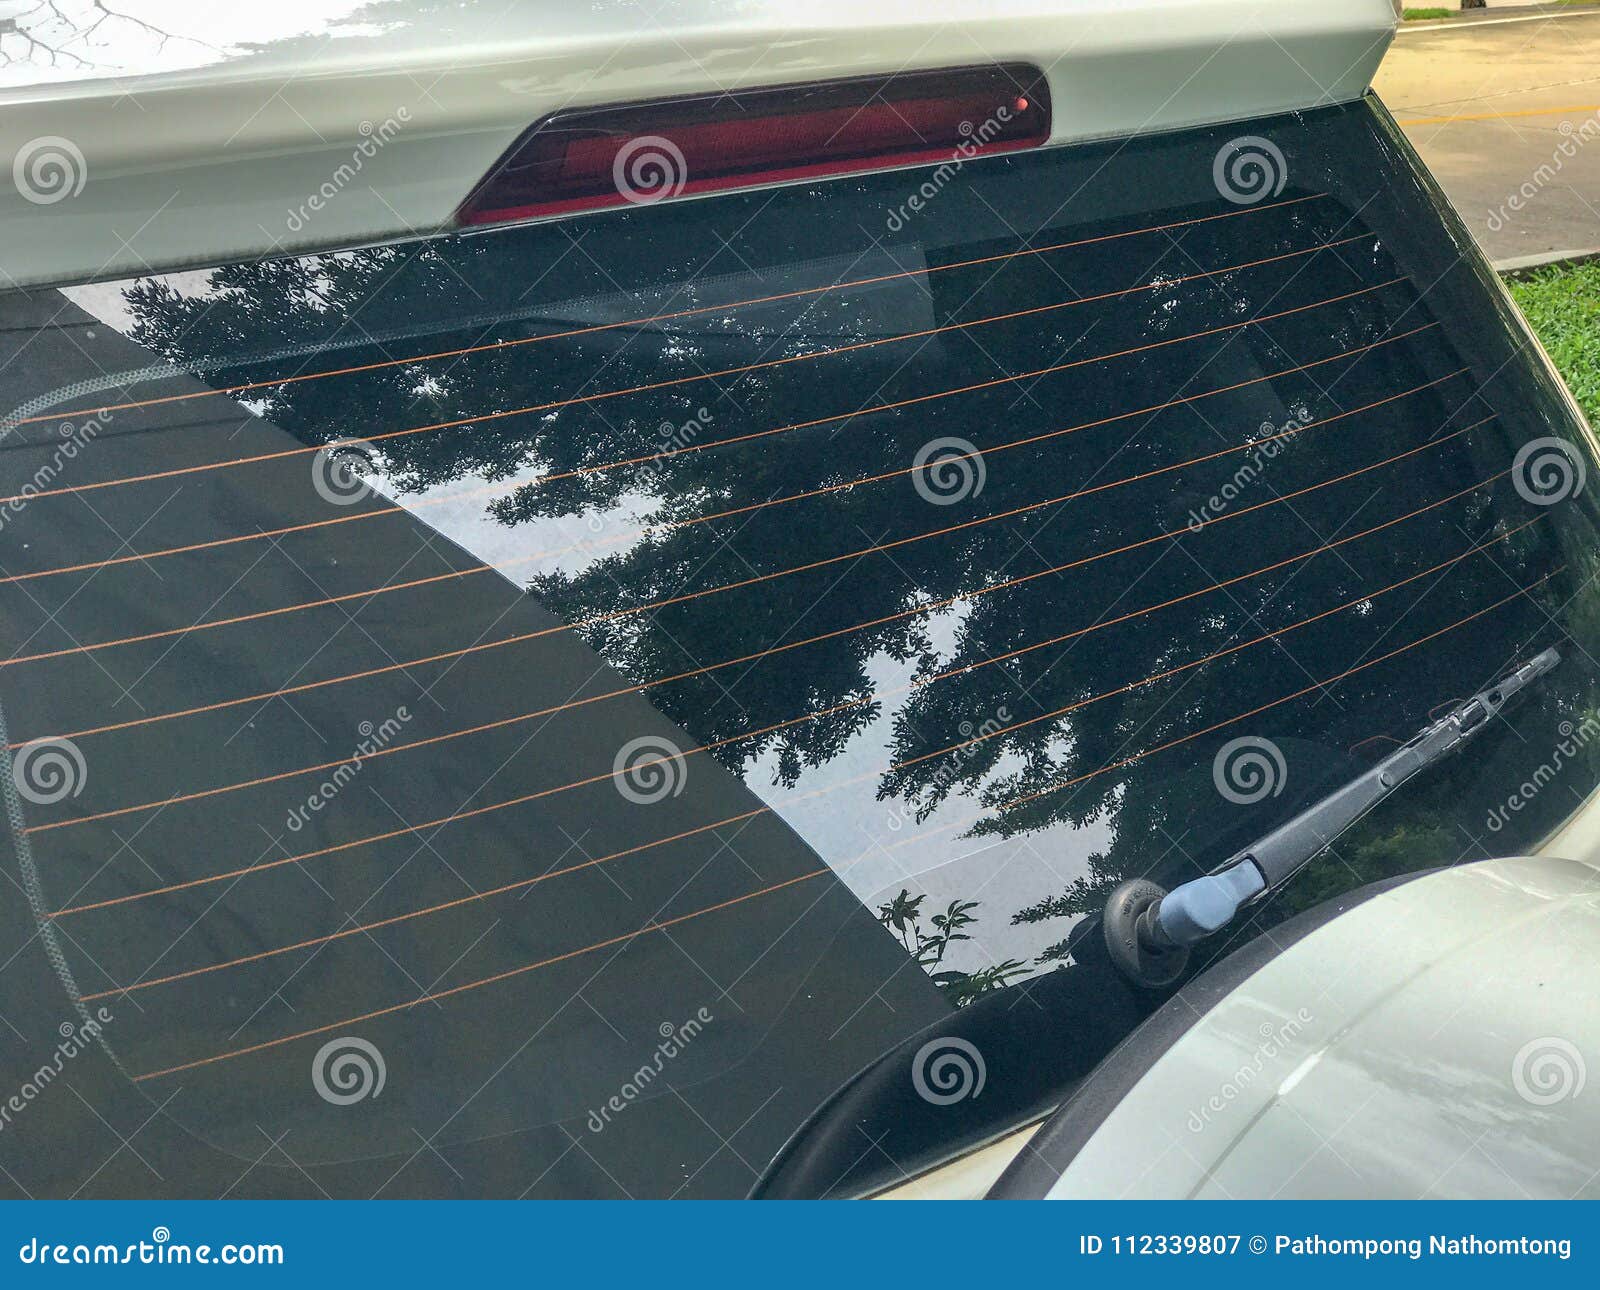 Back Windshield Wiper of the Car Stock Image  Image of rain, blade